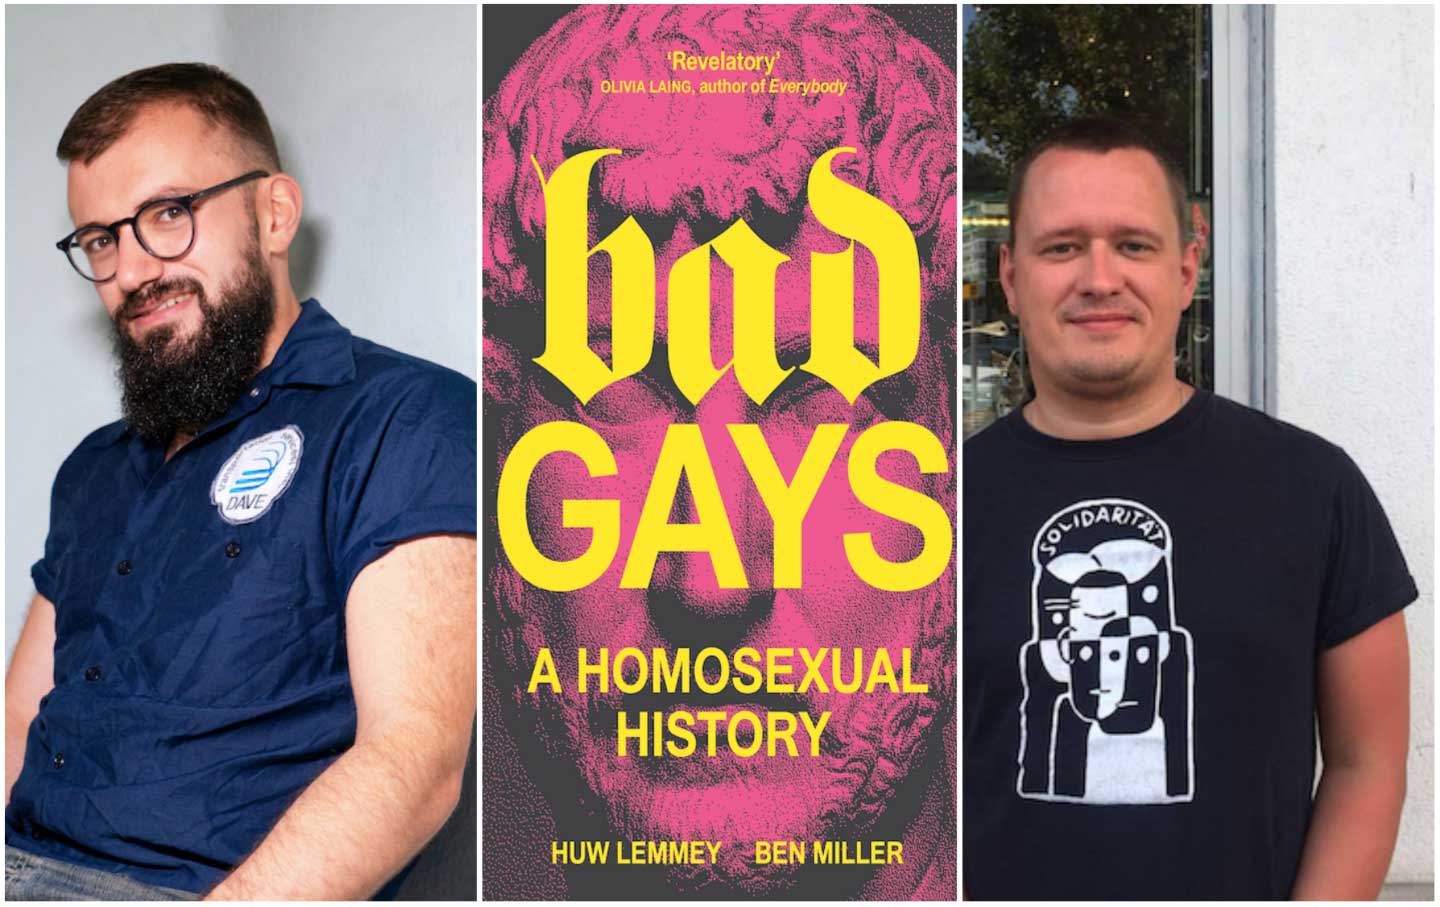 Bad Gays cover, with authors